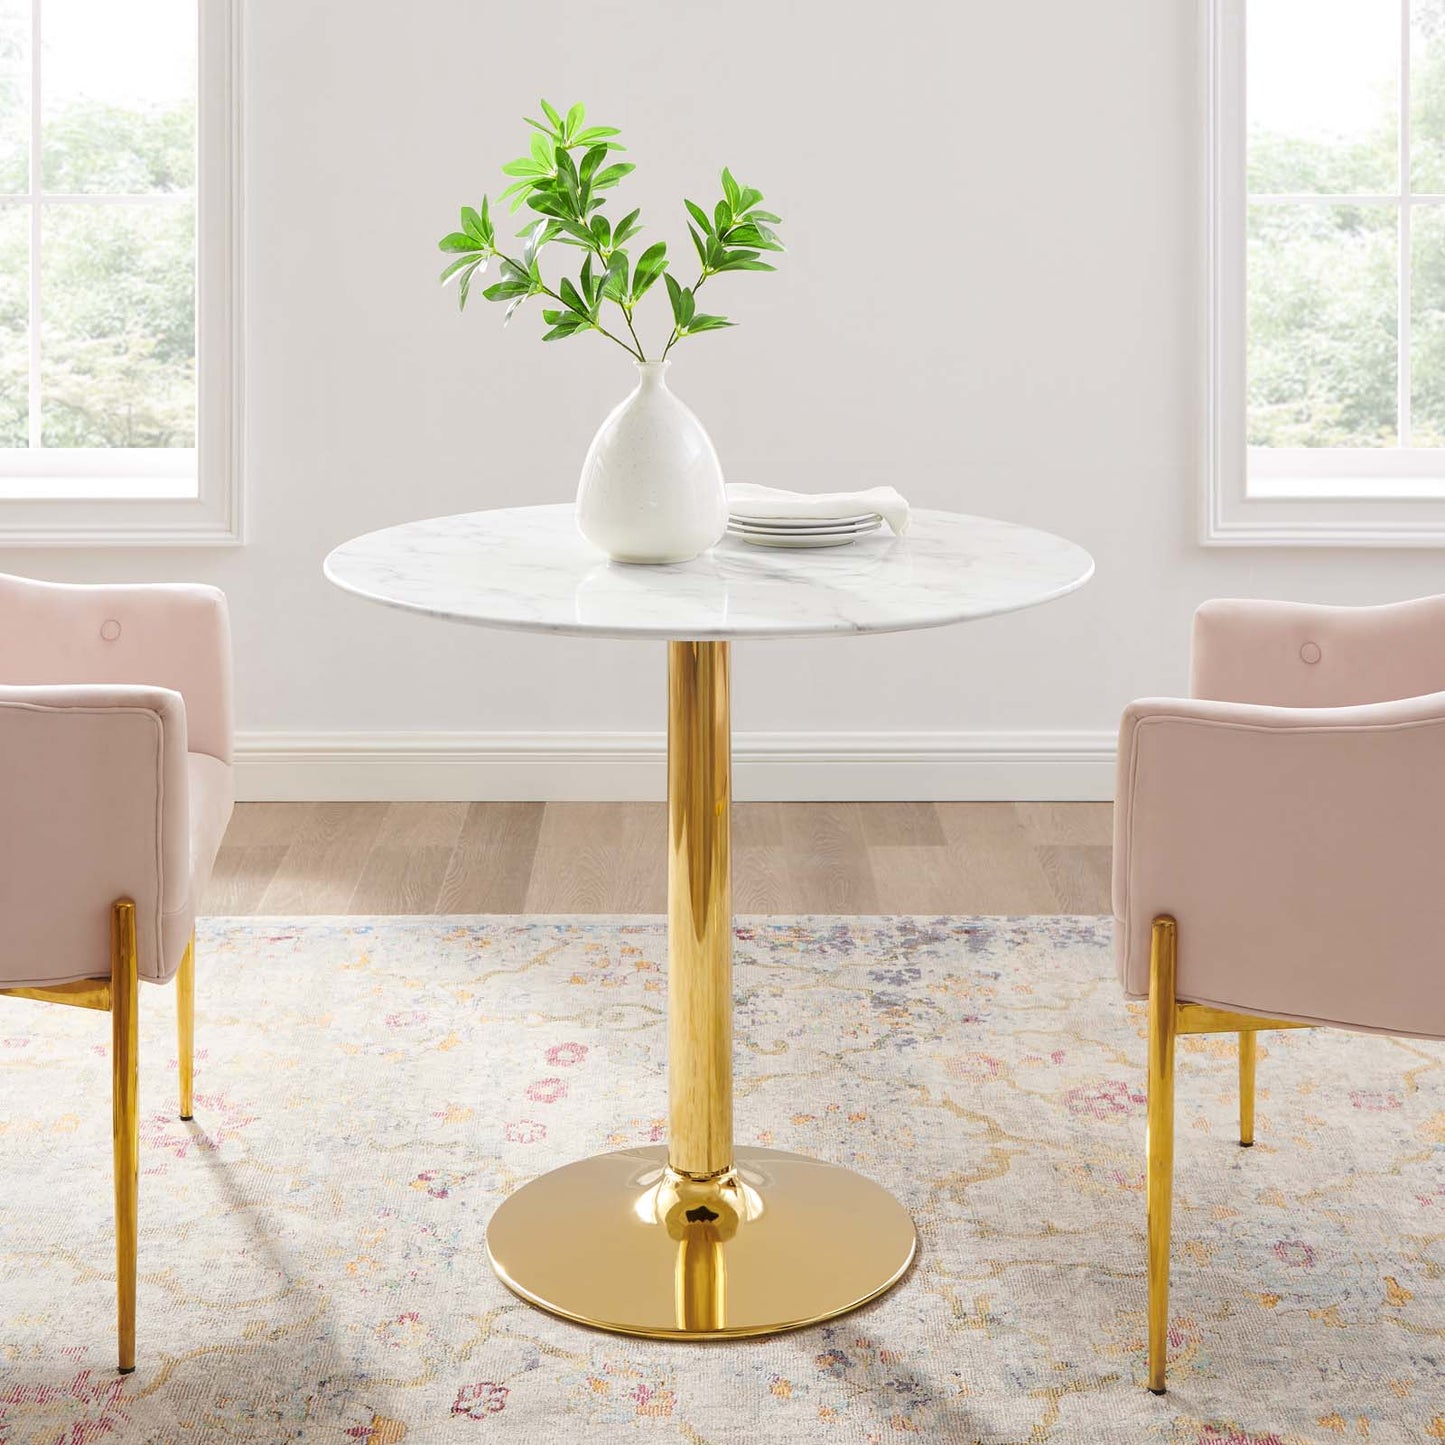 Verne 35" Artificial Marble Dining Table Gold White EEI-4549-GLD-WHI